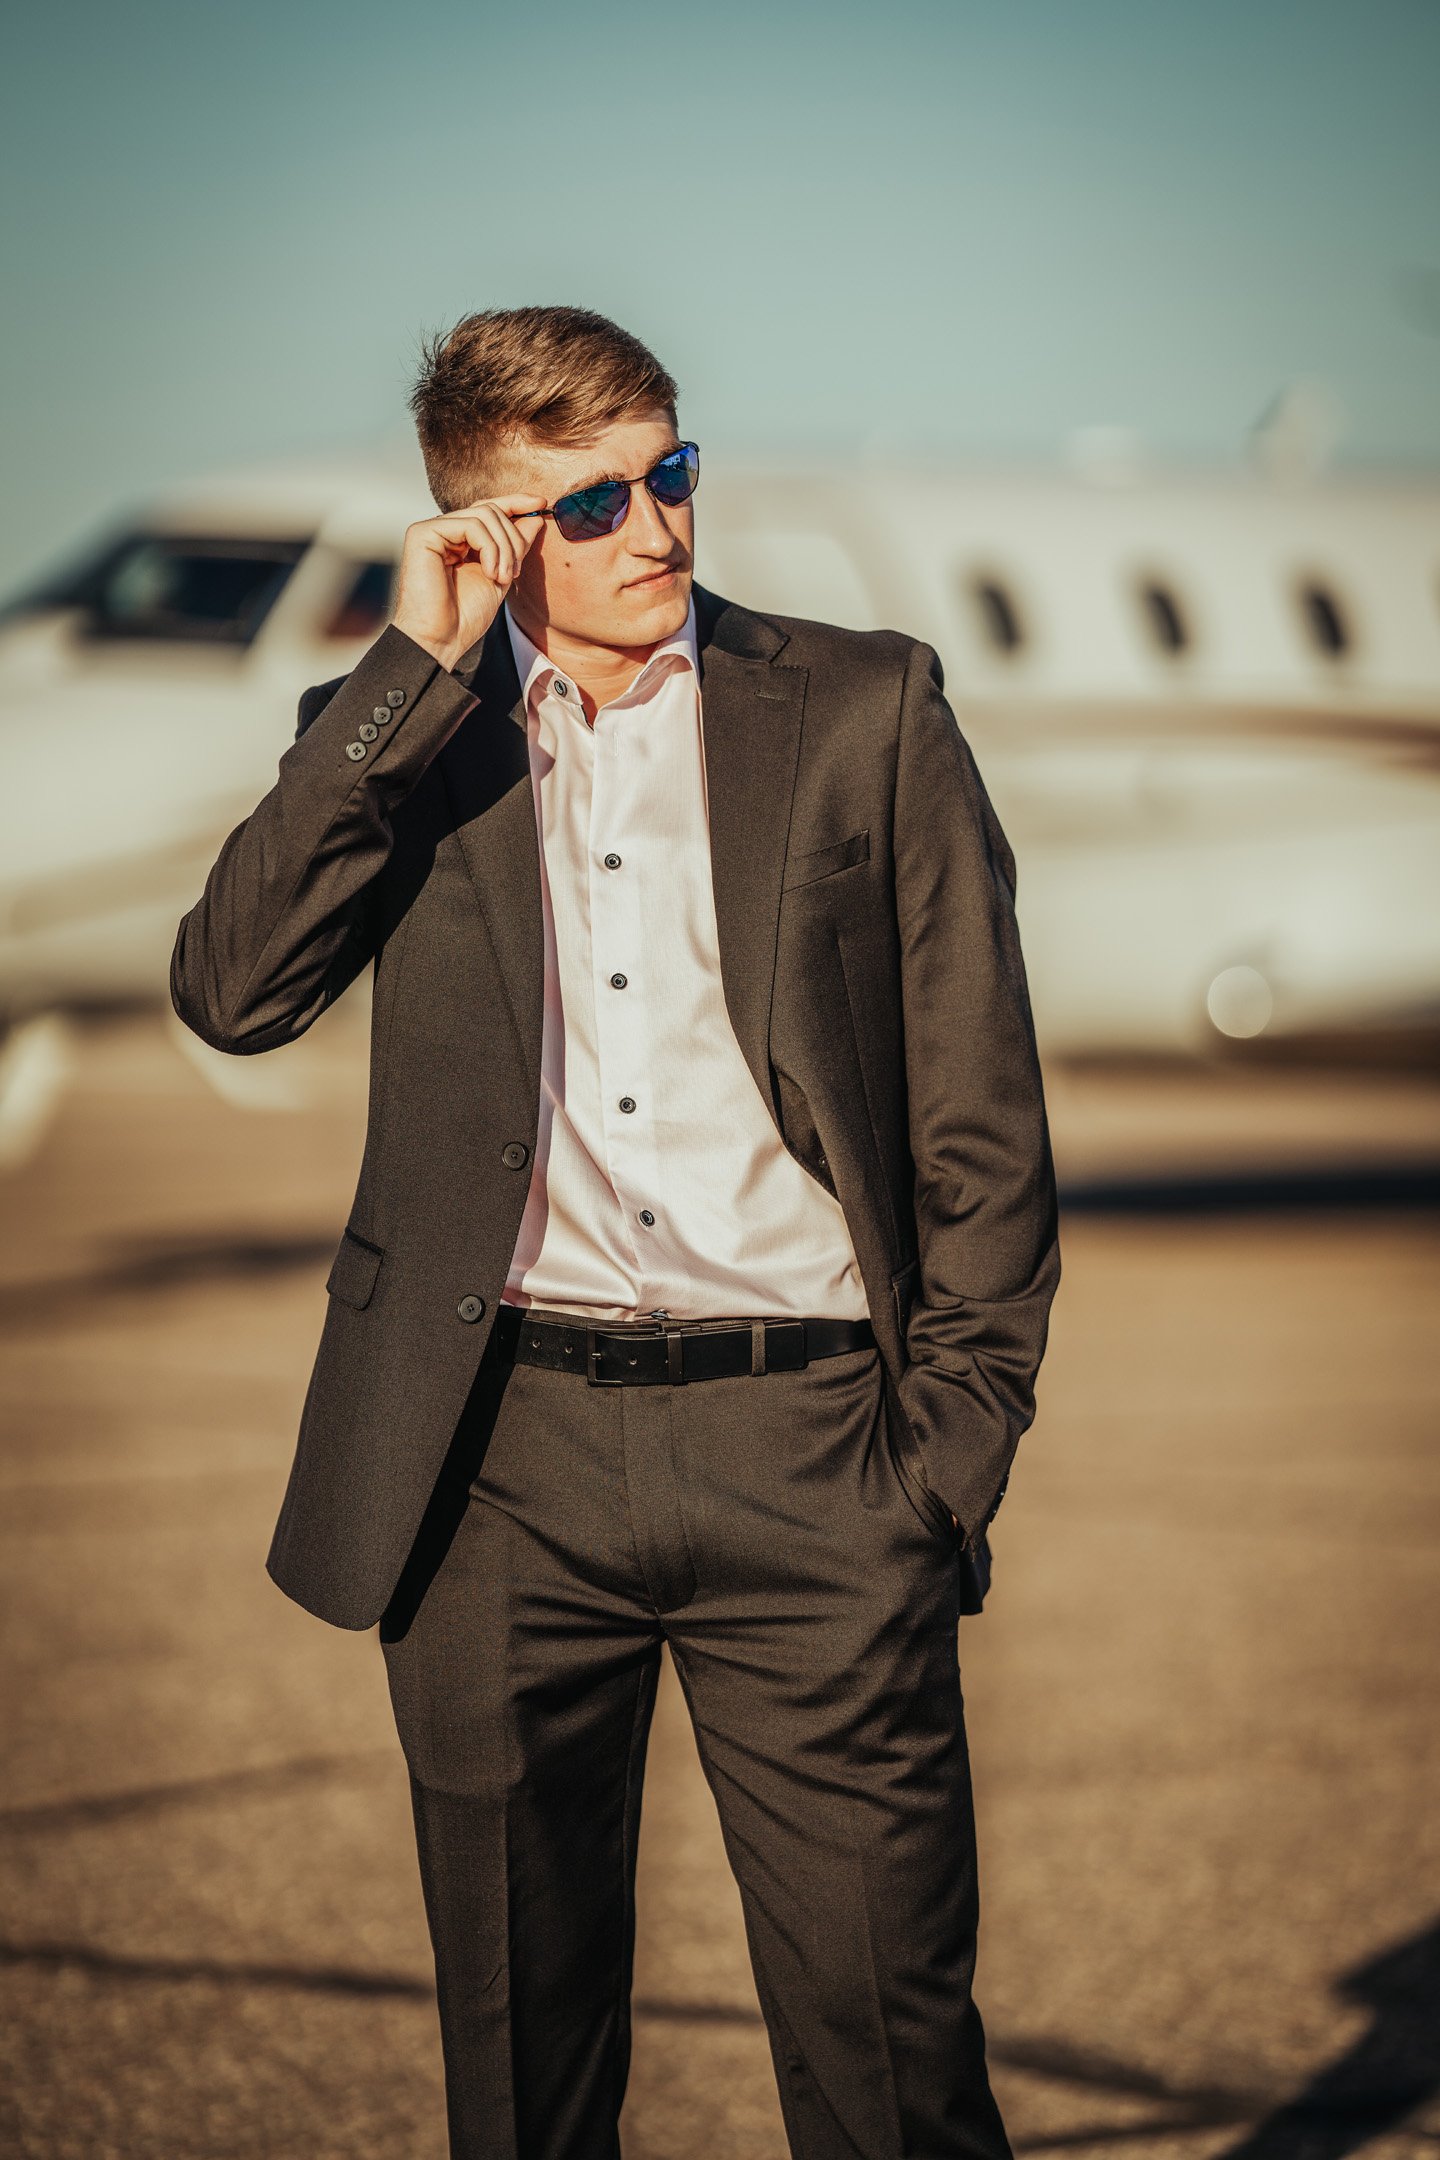 Close up of senior boy in suit looking off into distance through sunglasses